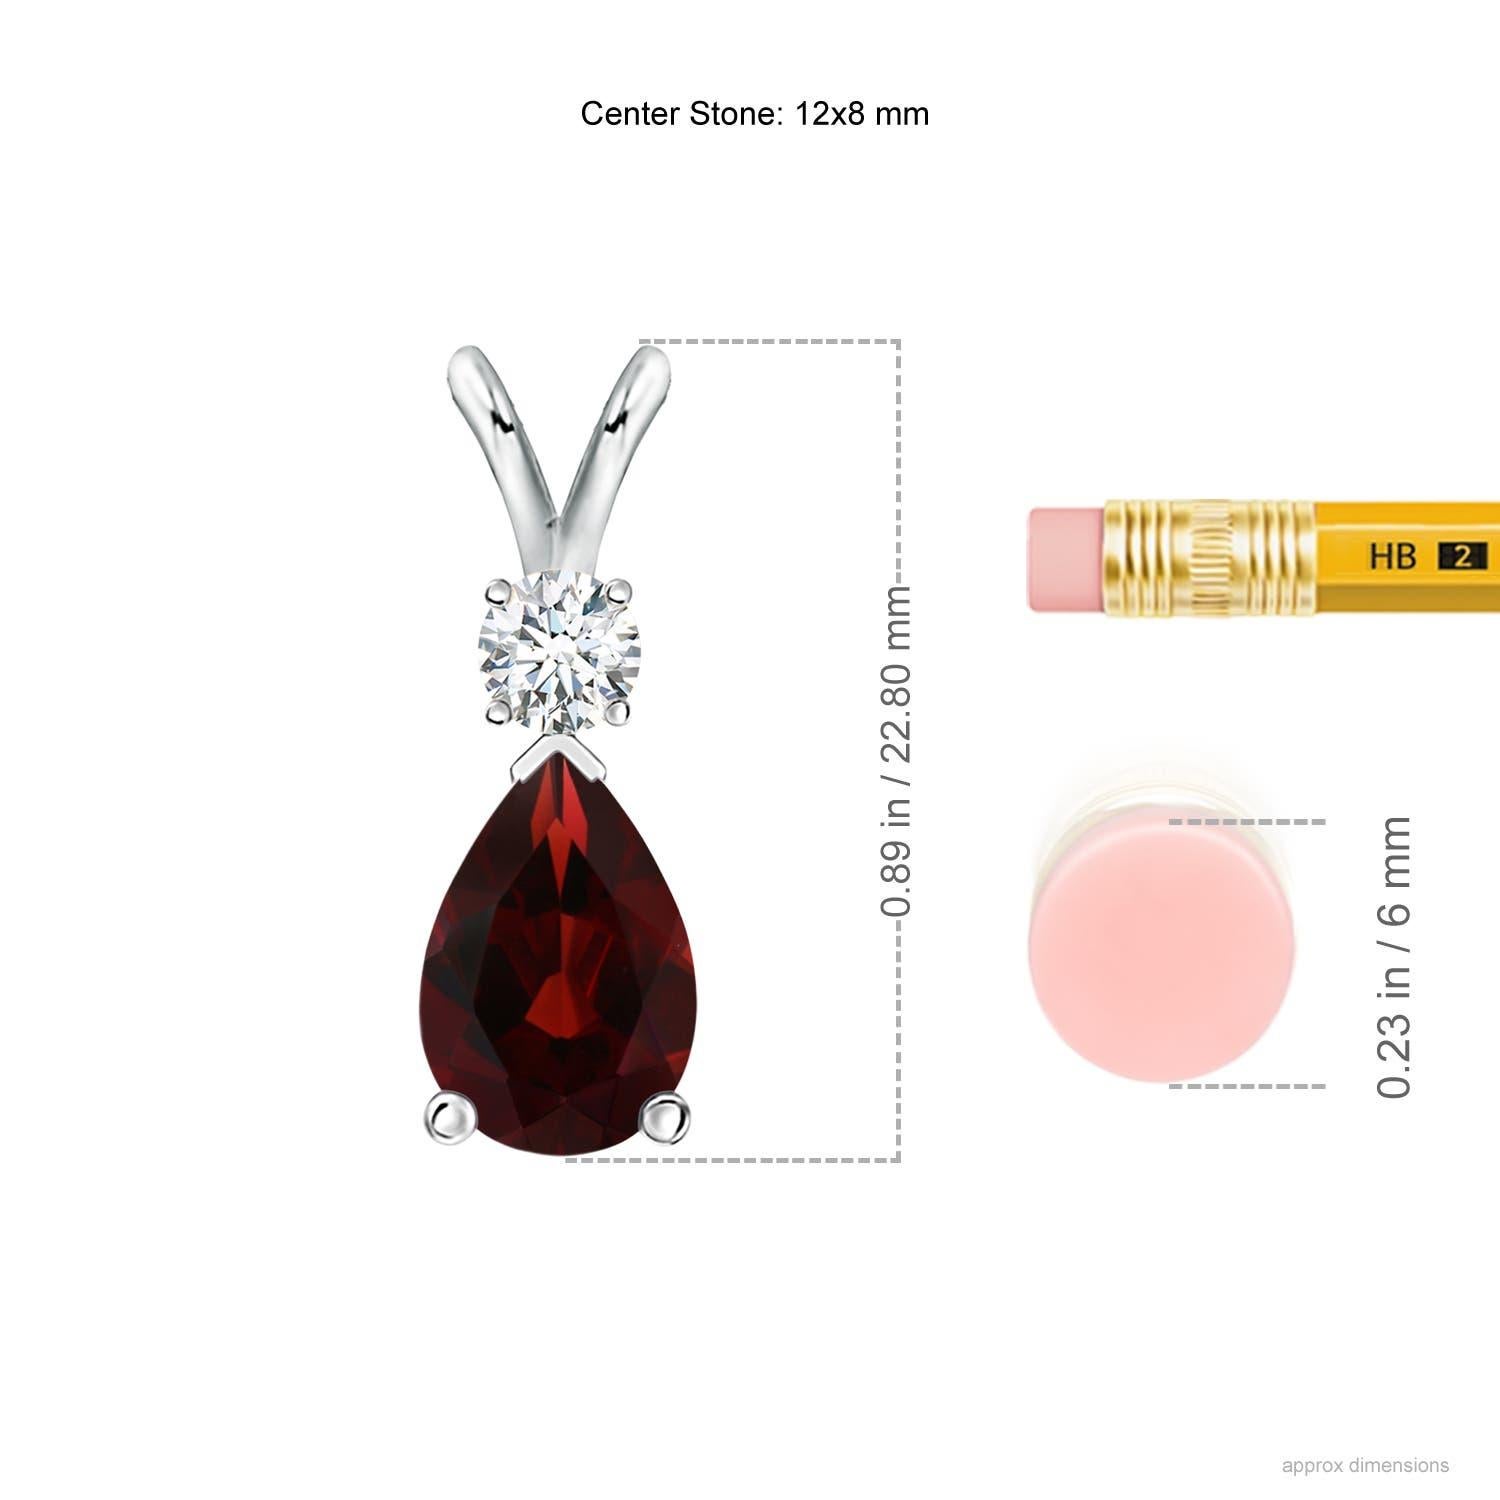 A pear-shaped intense red garnet is secured in a prong setting and embellished with a diamond accent on the top. Simple yet stunning, this teardrop garnet pendant with V bale is sculpted in 14k white gold.
Garnet is the Birthstone for January and